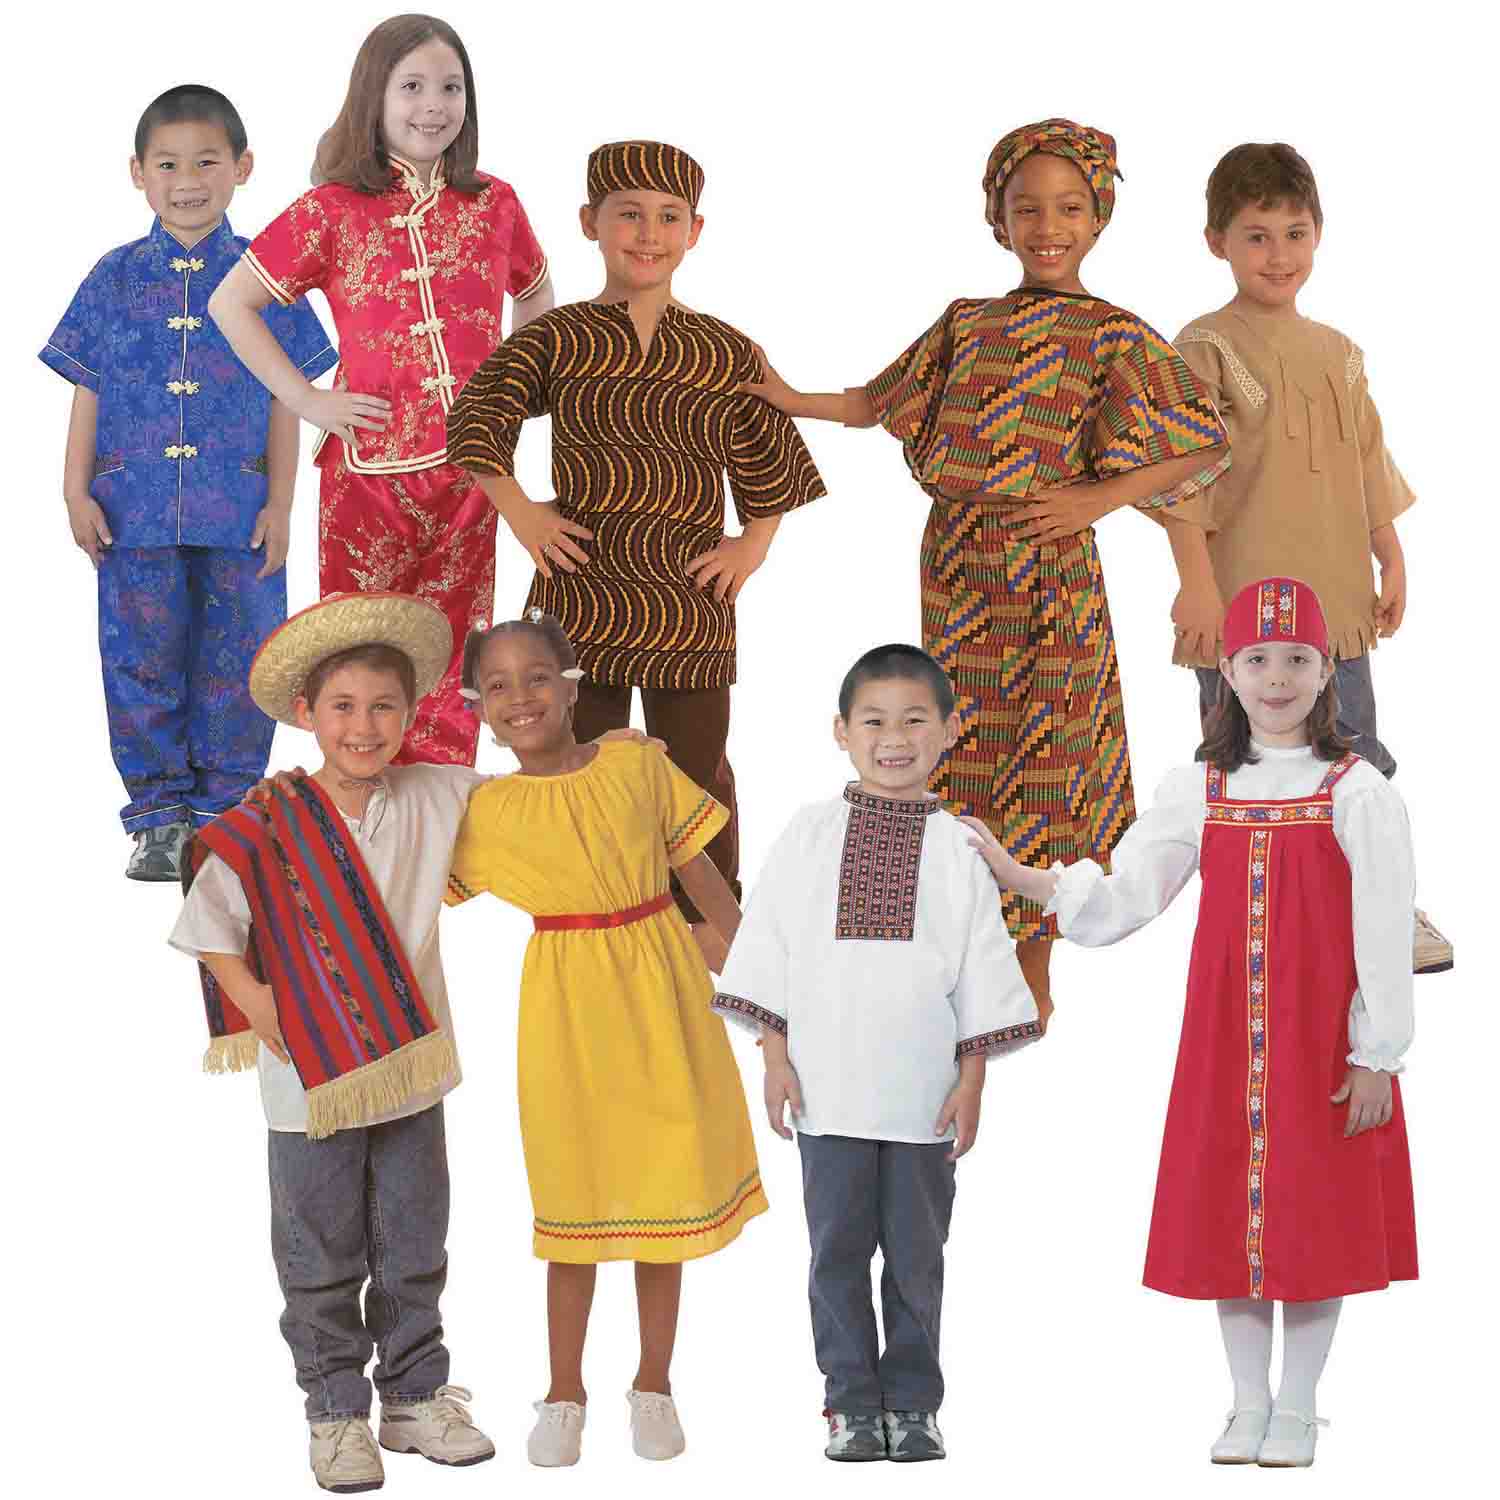 Multicultural clothing and ethnic dressing up costumes for Dolls all sizes 